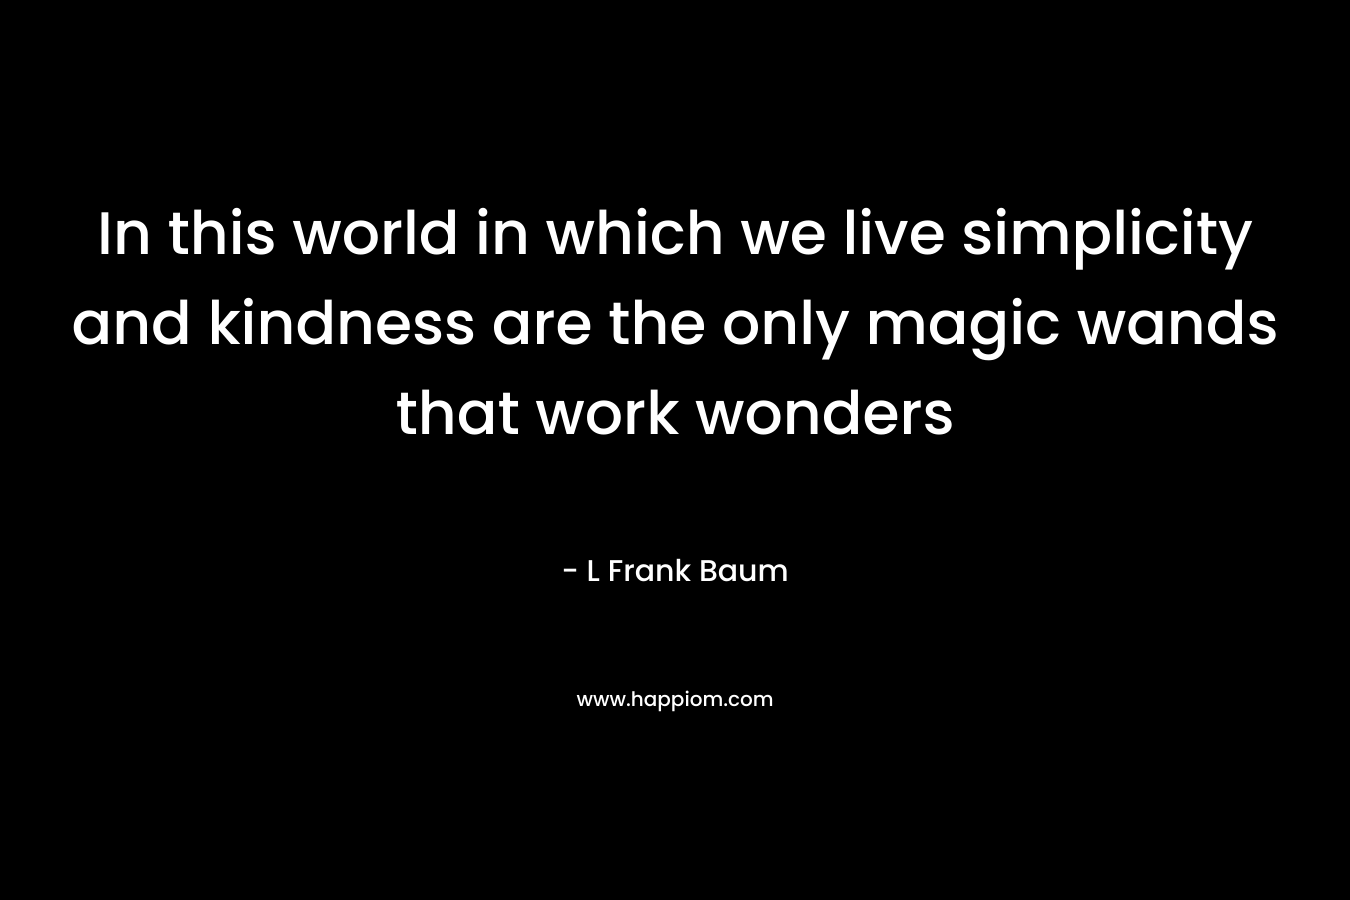 In this world in which we live simplicity and kindness are the only magic wands that work wonders